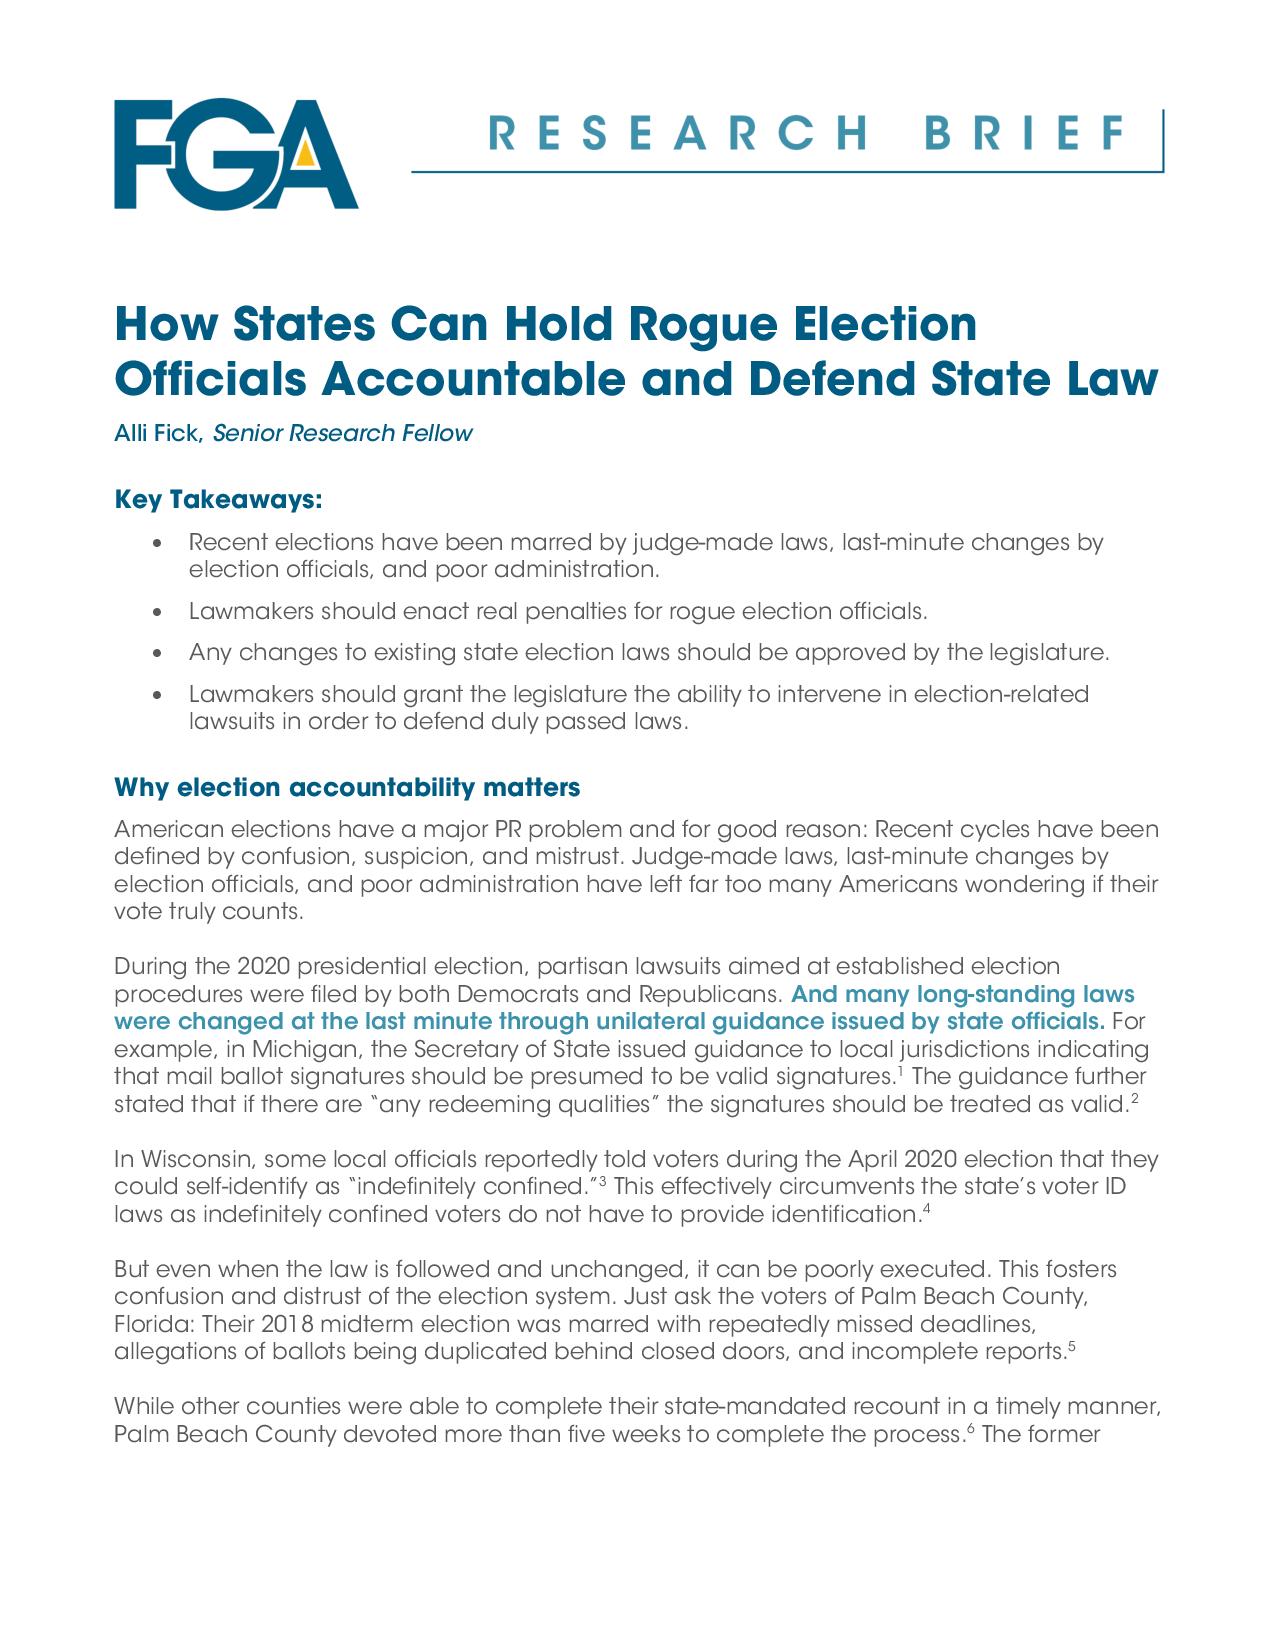 How States Can Hold Rogue Election Officials Accountable and Defend State Law